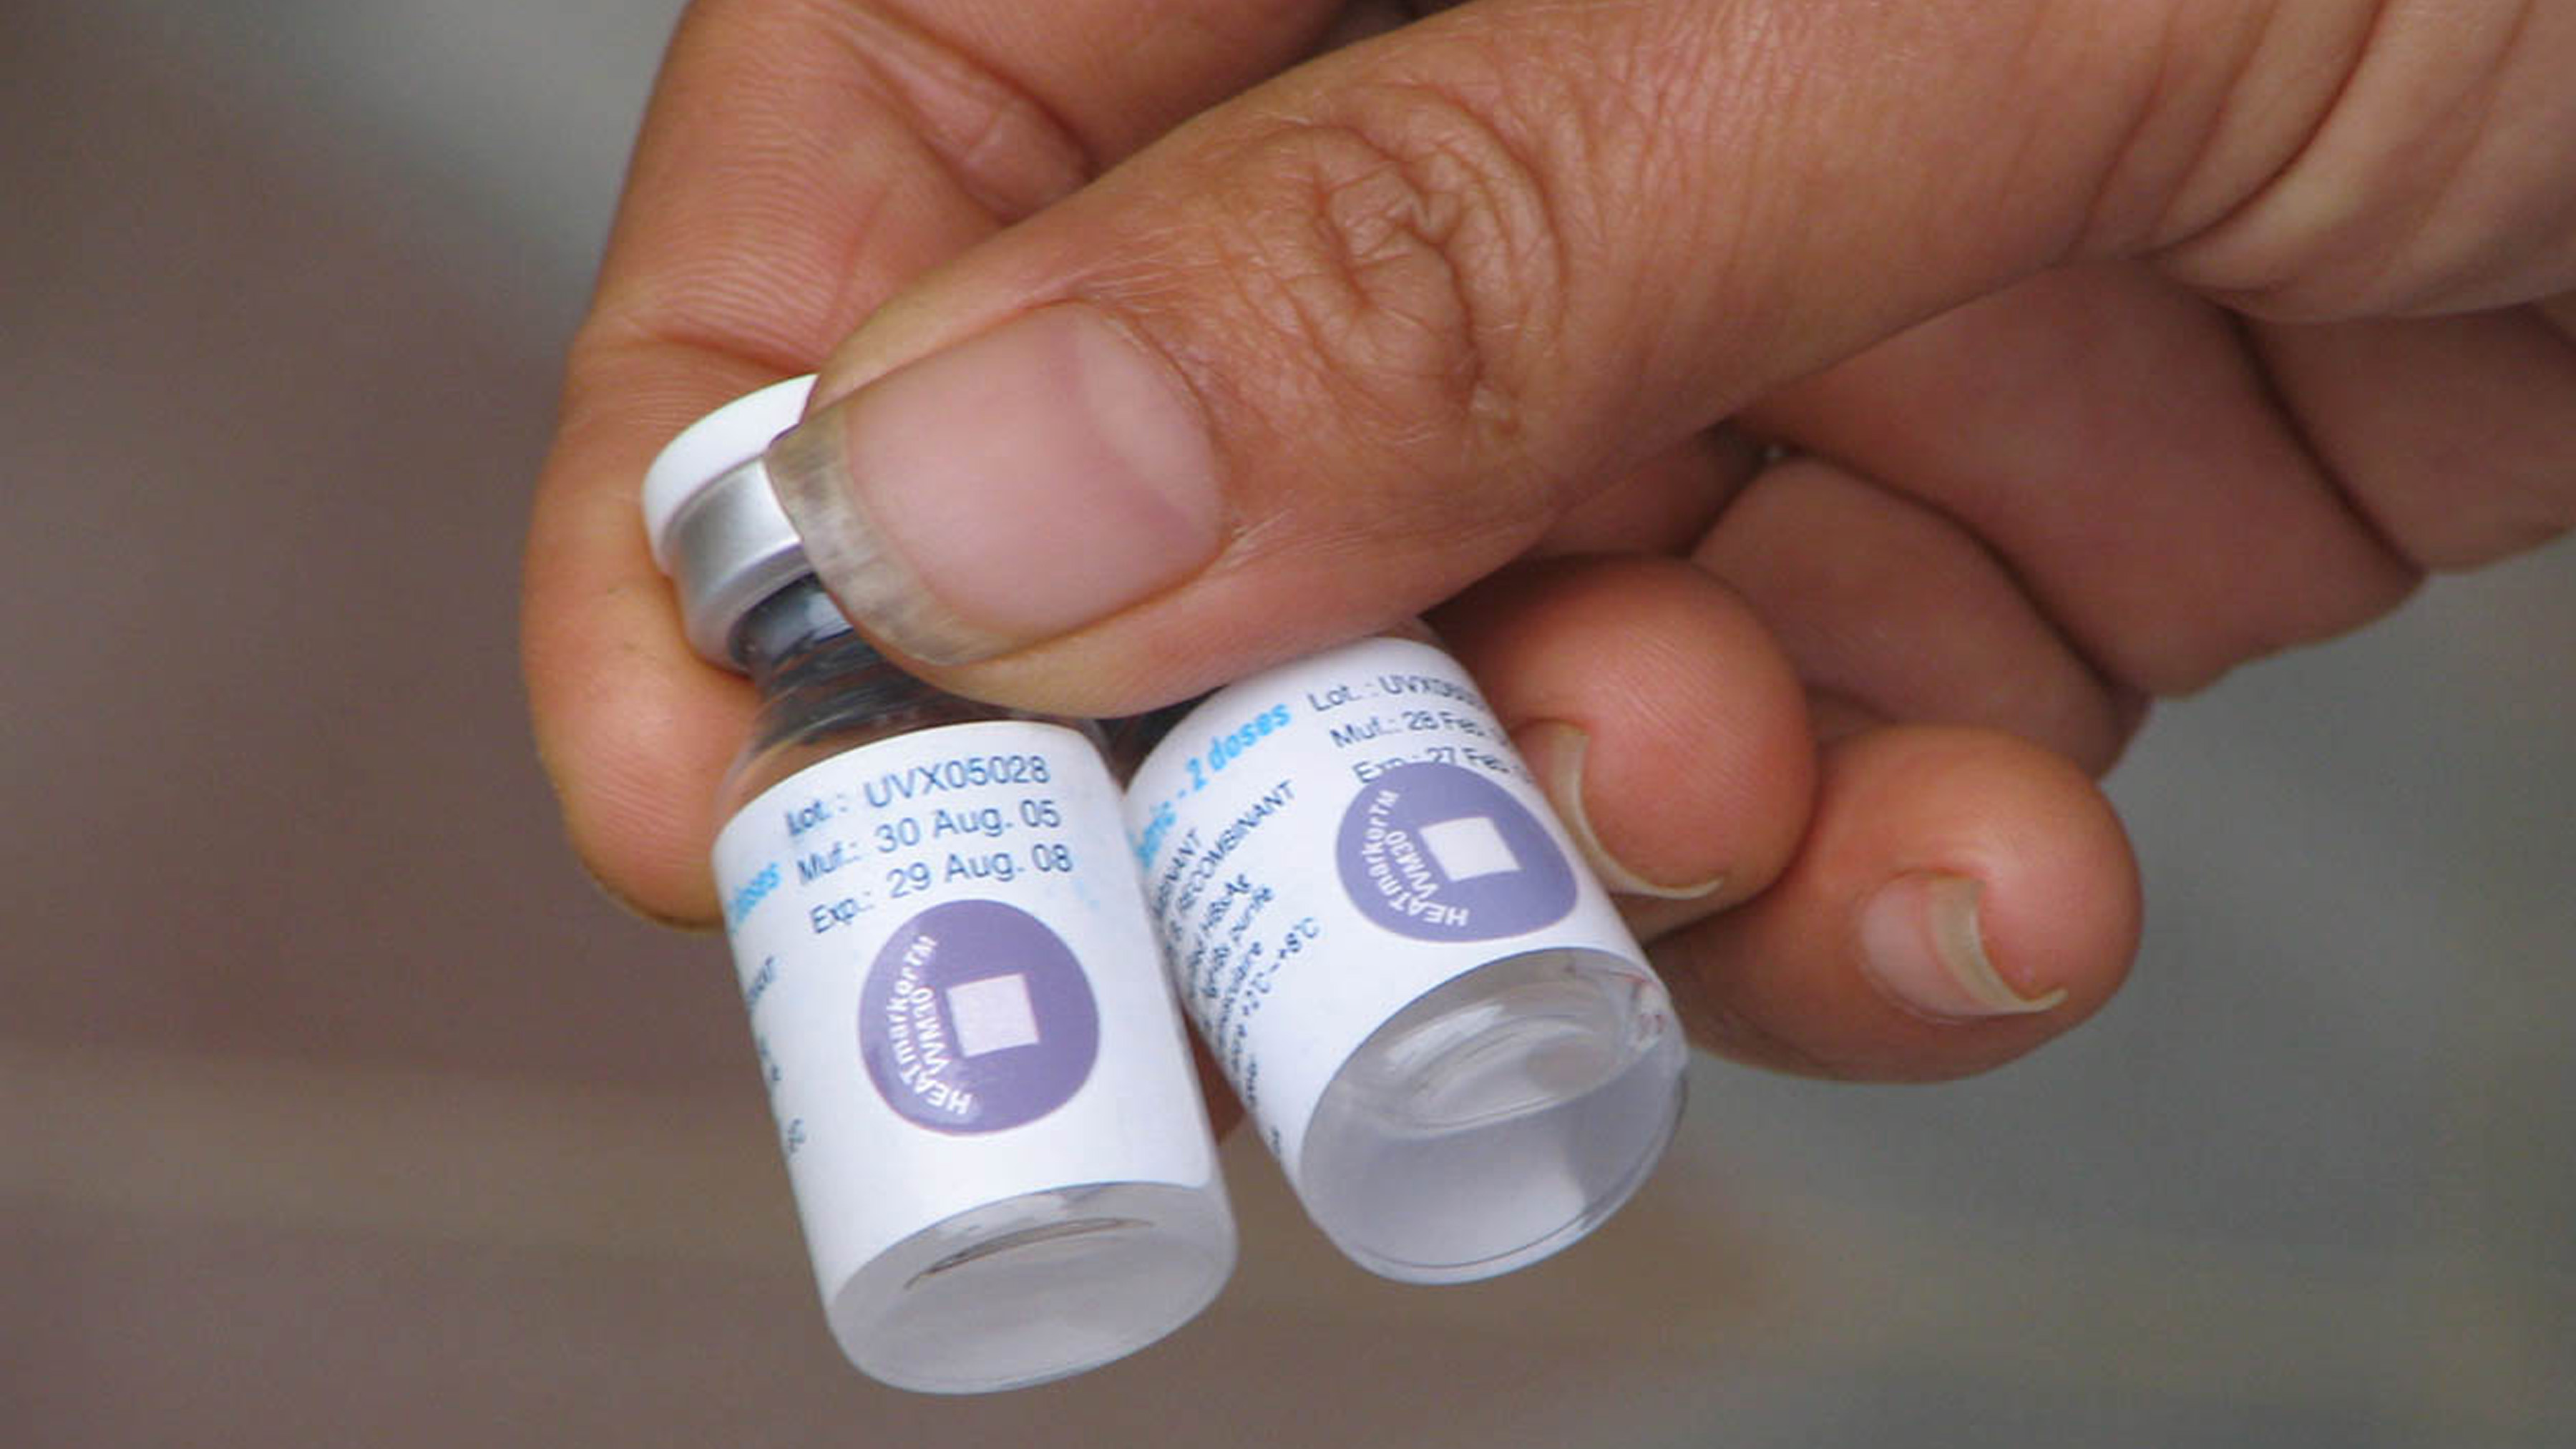 A healthcare worker holding two vaccine vials with vial monitors.